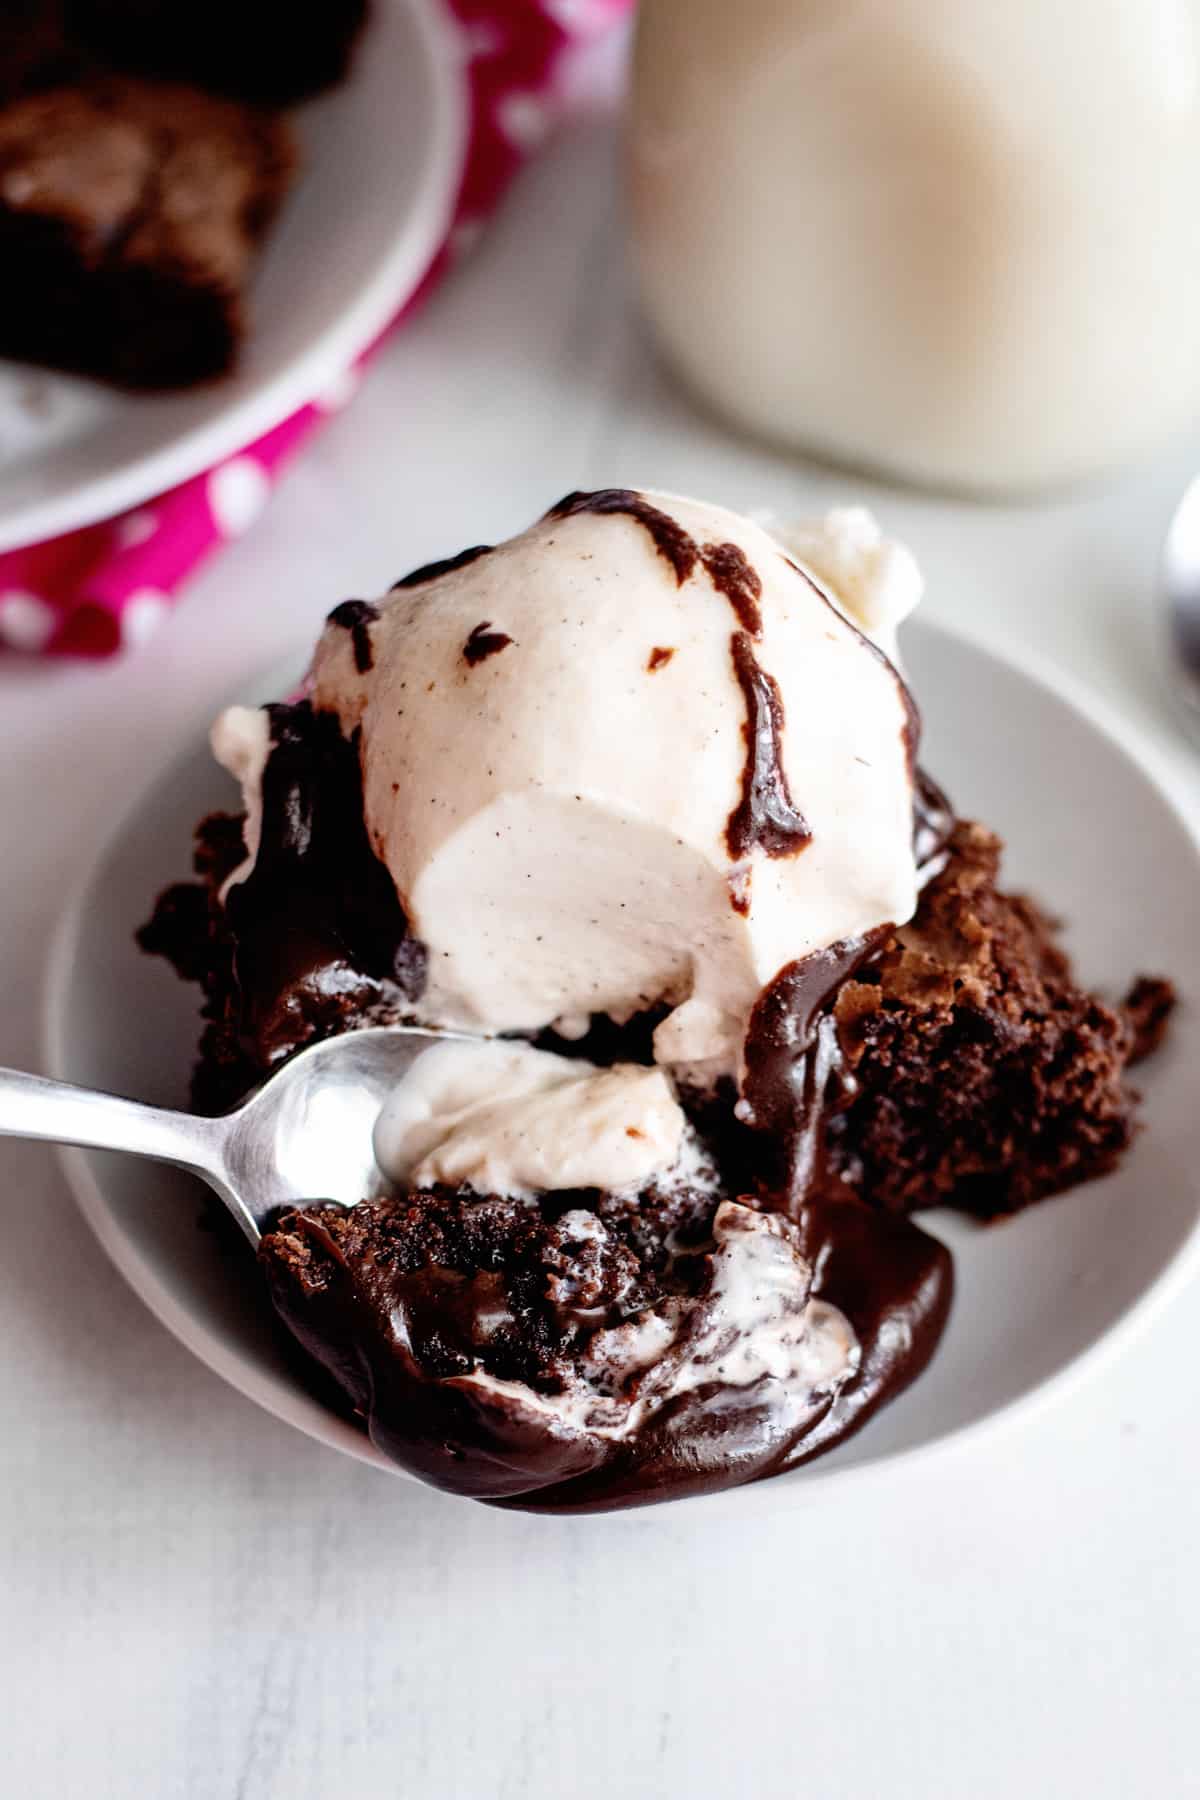 spoon scooping up a piece of brownie with ice cream and hot fudge